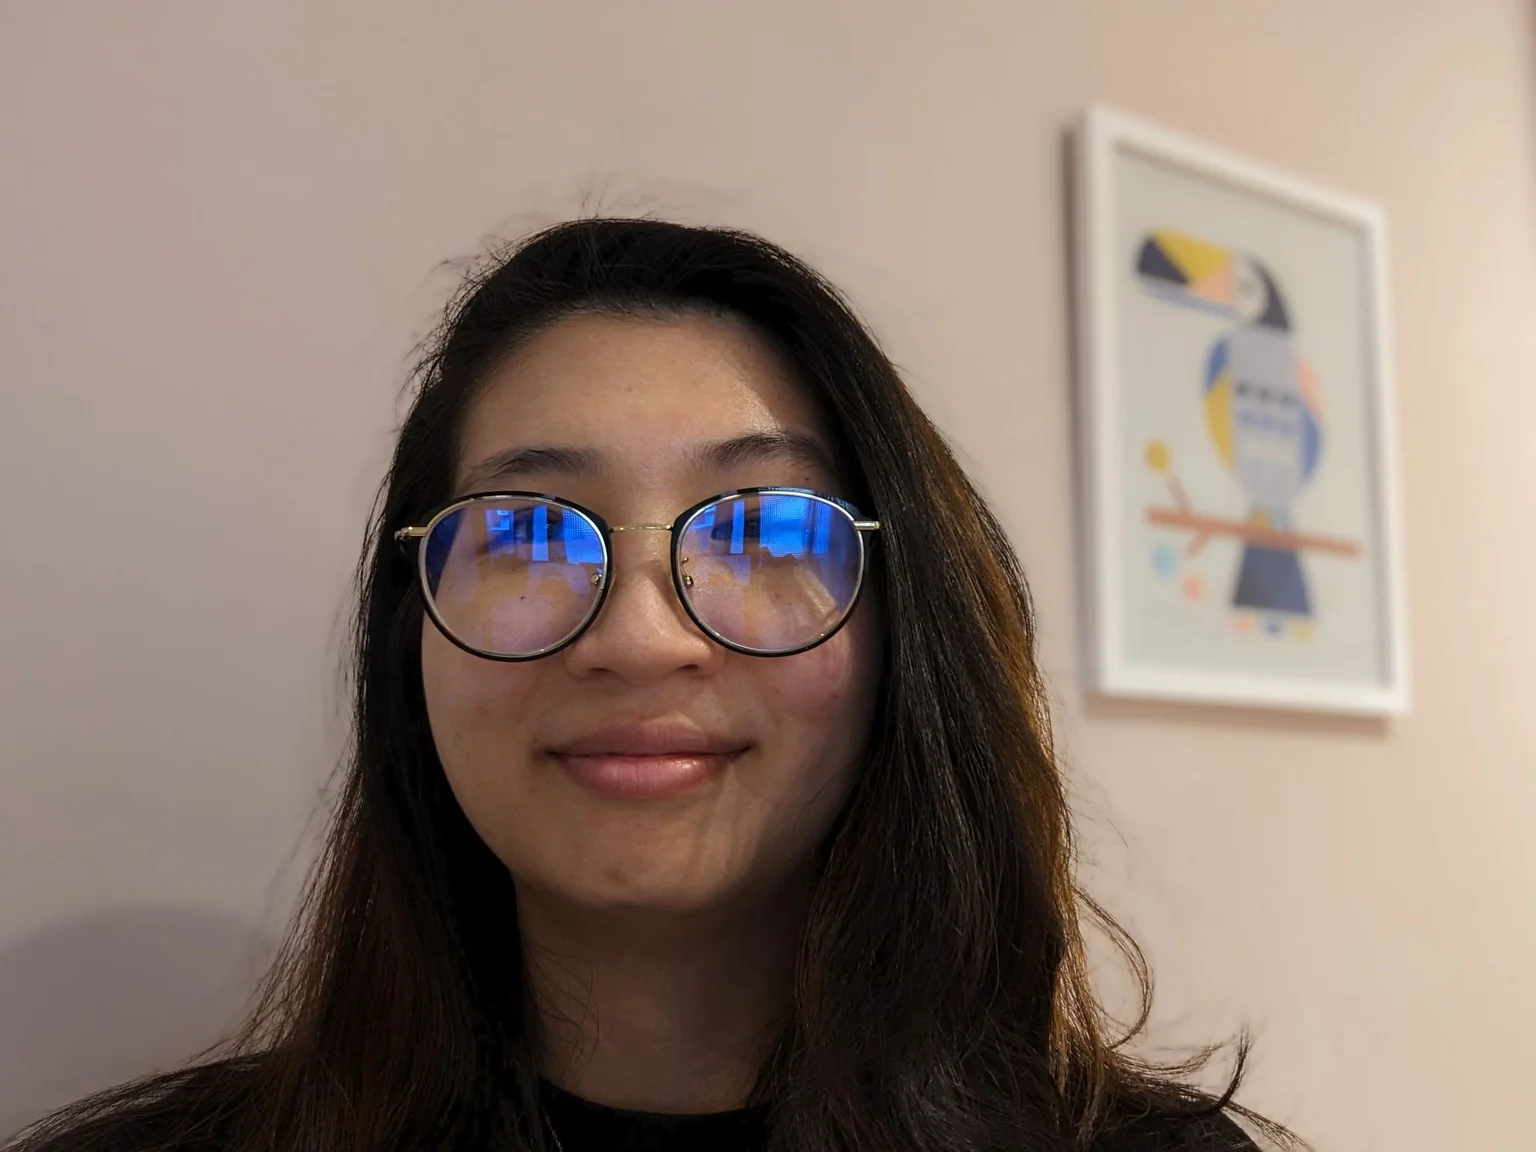 A woman looking into the camera and smiling; in her glasses you can see the slight reflection of the Guided Frame app on her phone, which she is using to take this selfie.